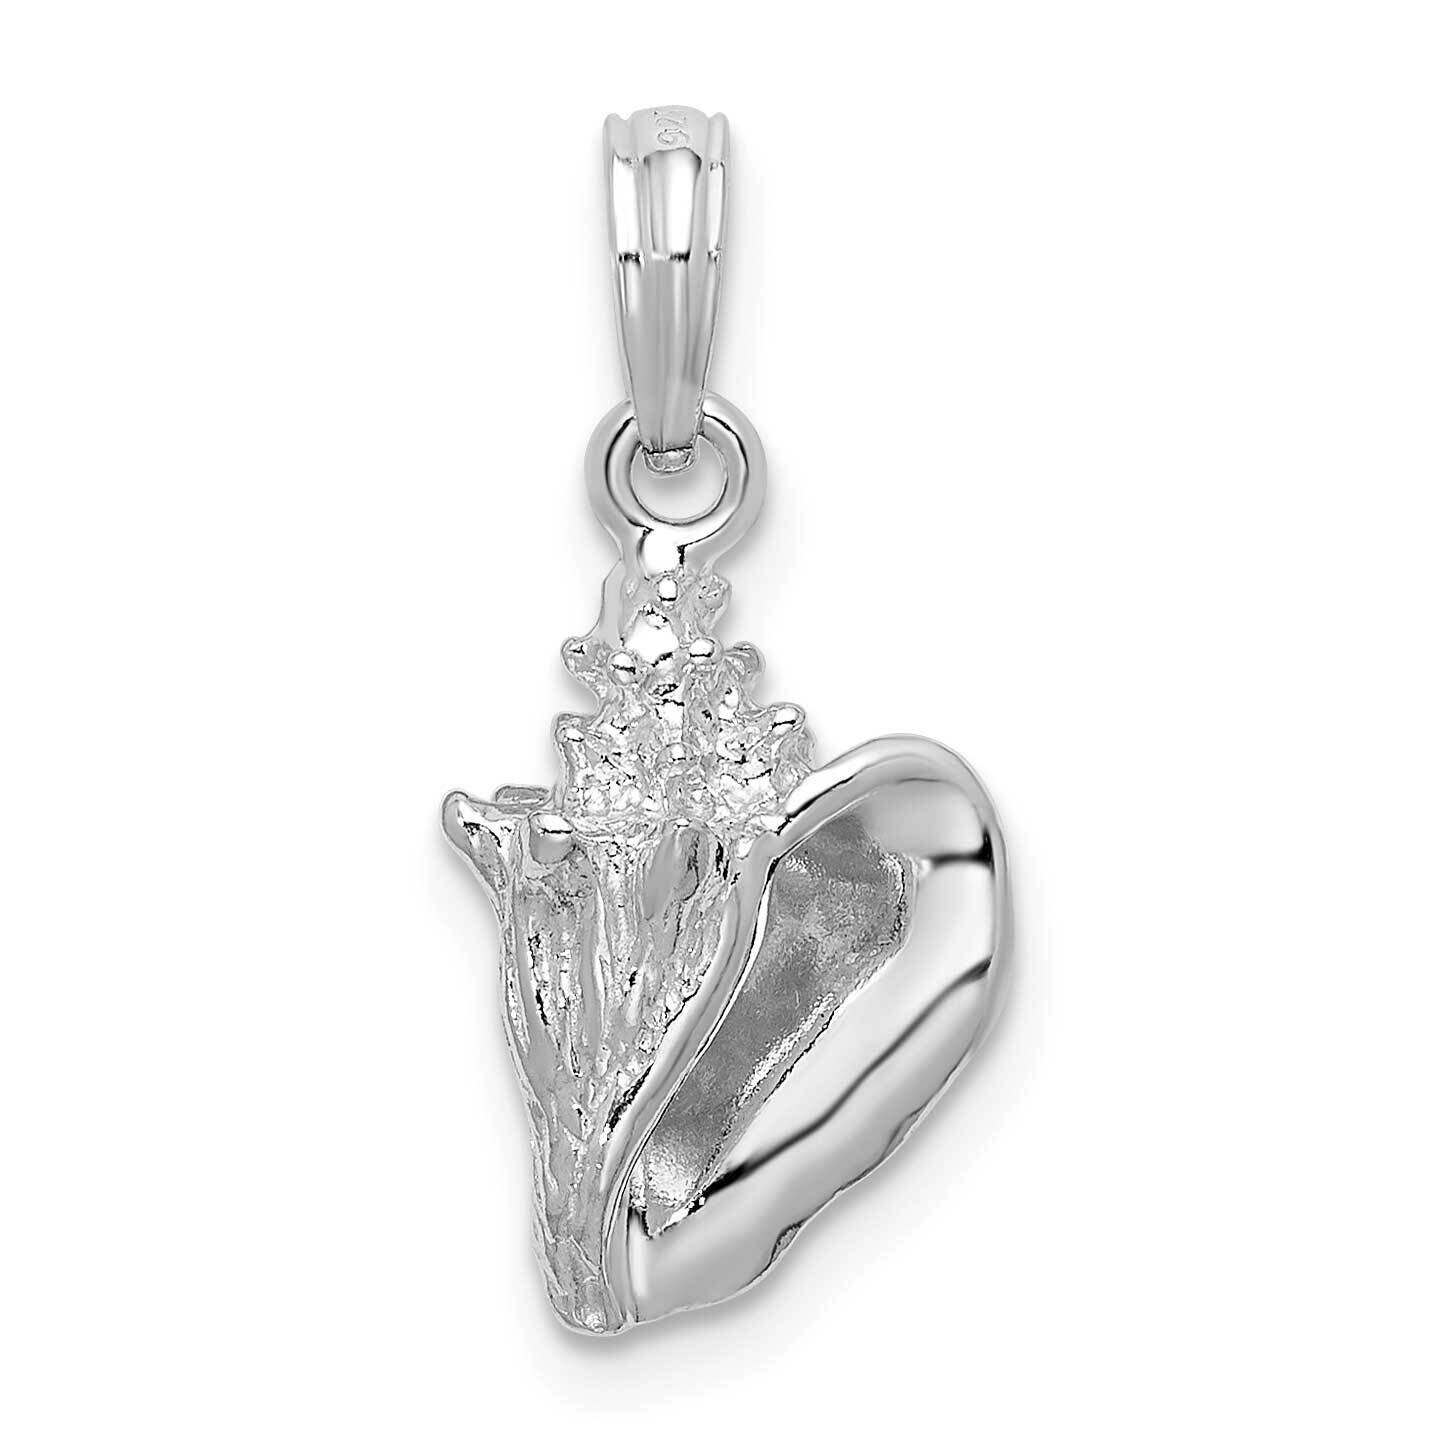 3D Conch Pendant Sterling Silver Polished QC9832